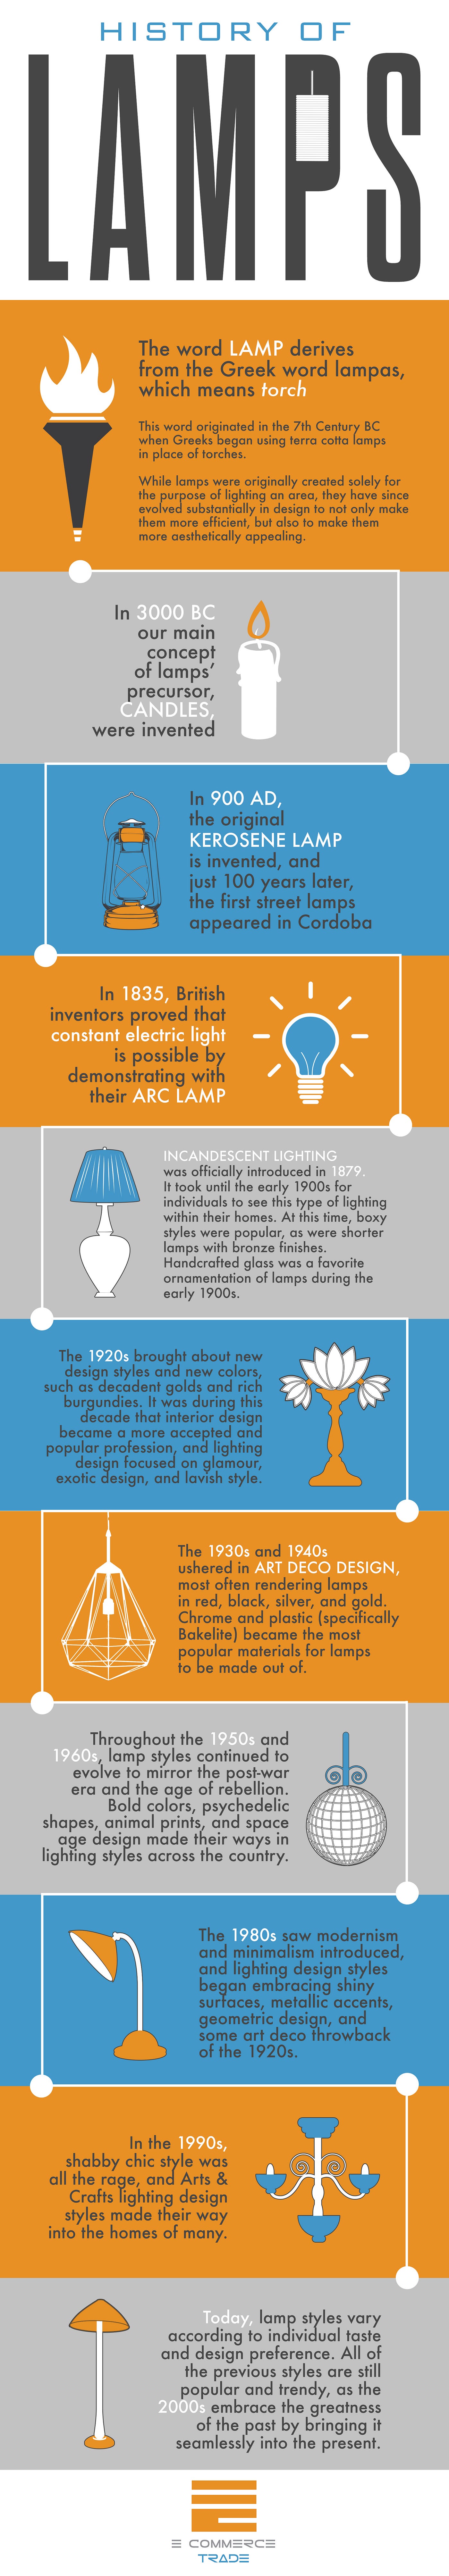 History of Lamp Styles Infographic | by ecommerce trade | Medium